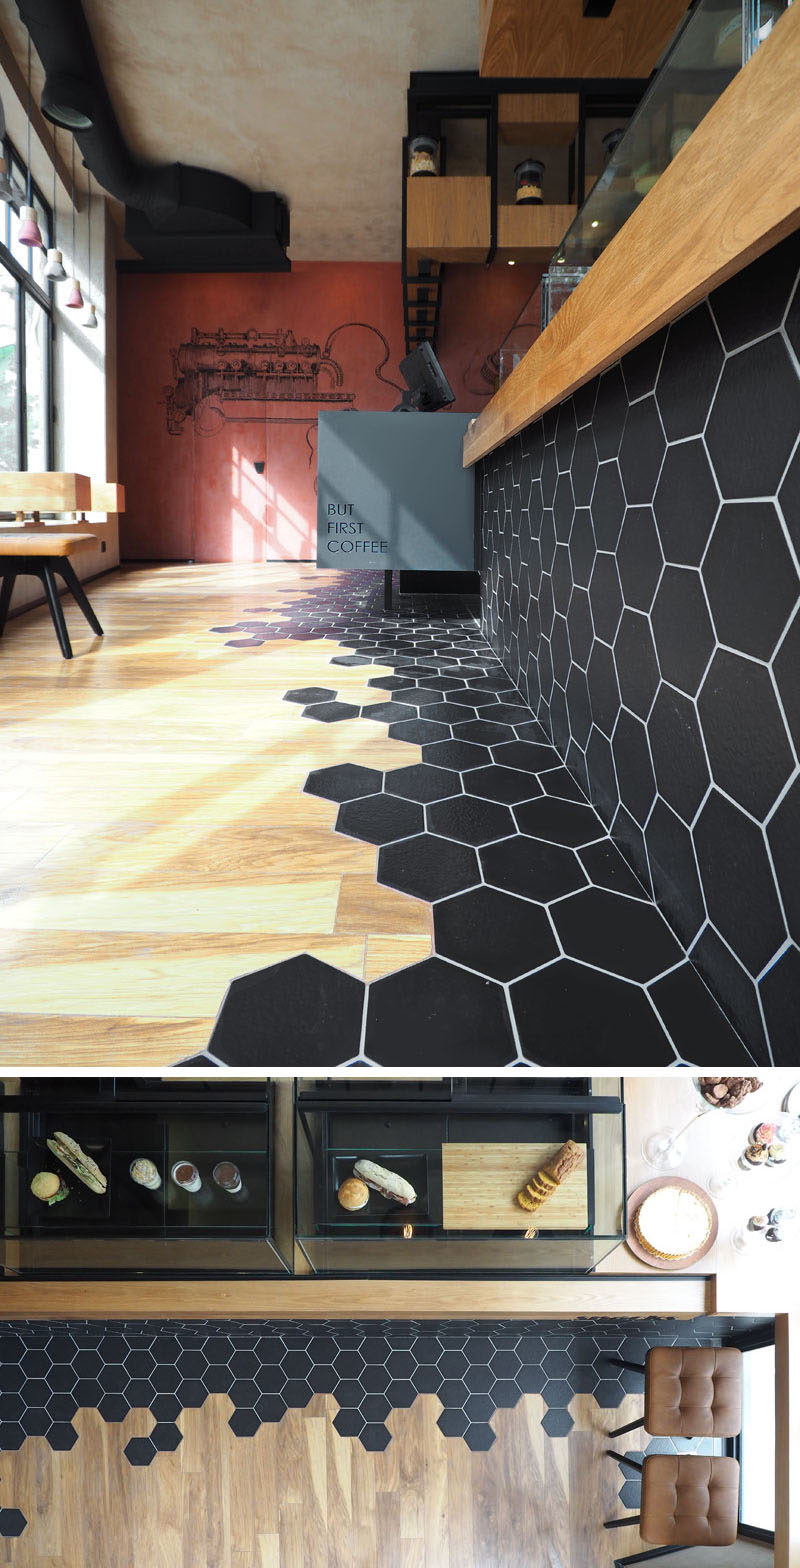 Black hexagon tiles and wood laminate flooring are a design element in this modern cafe.